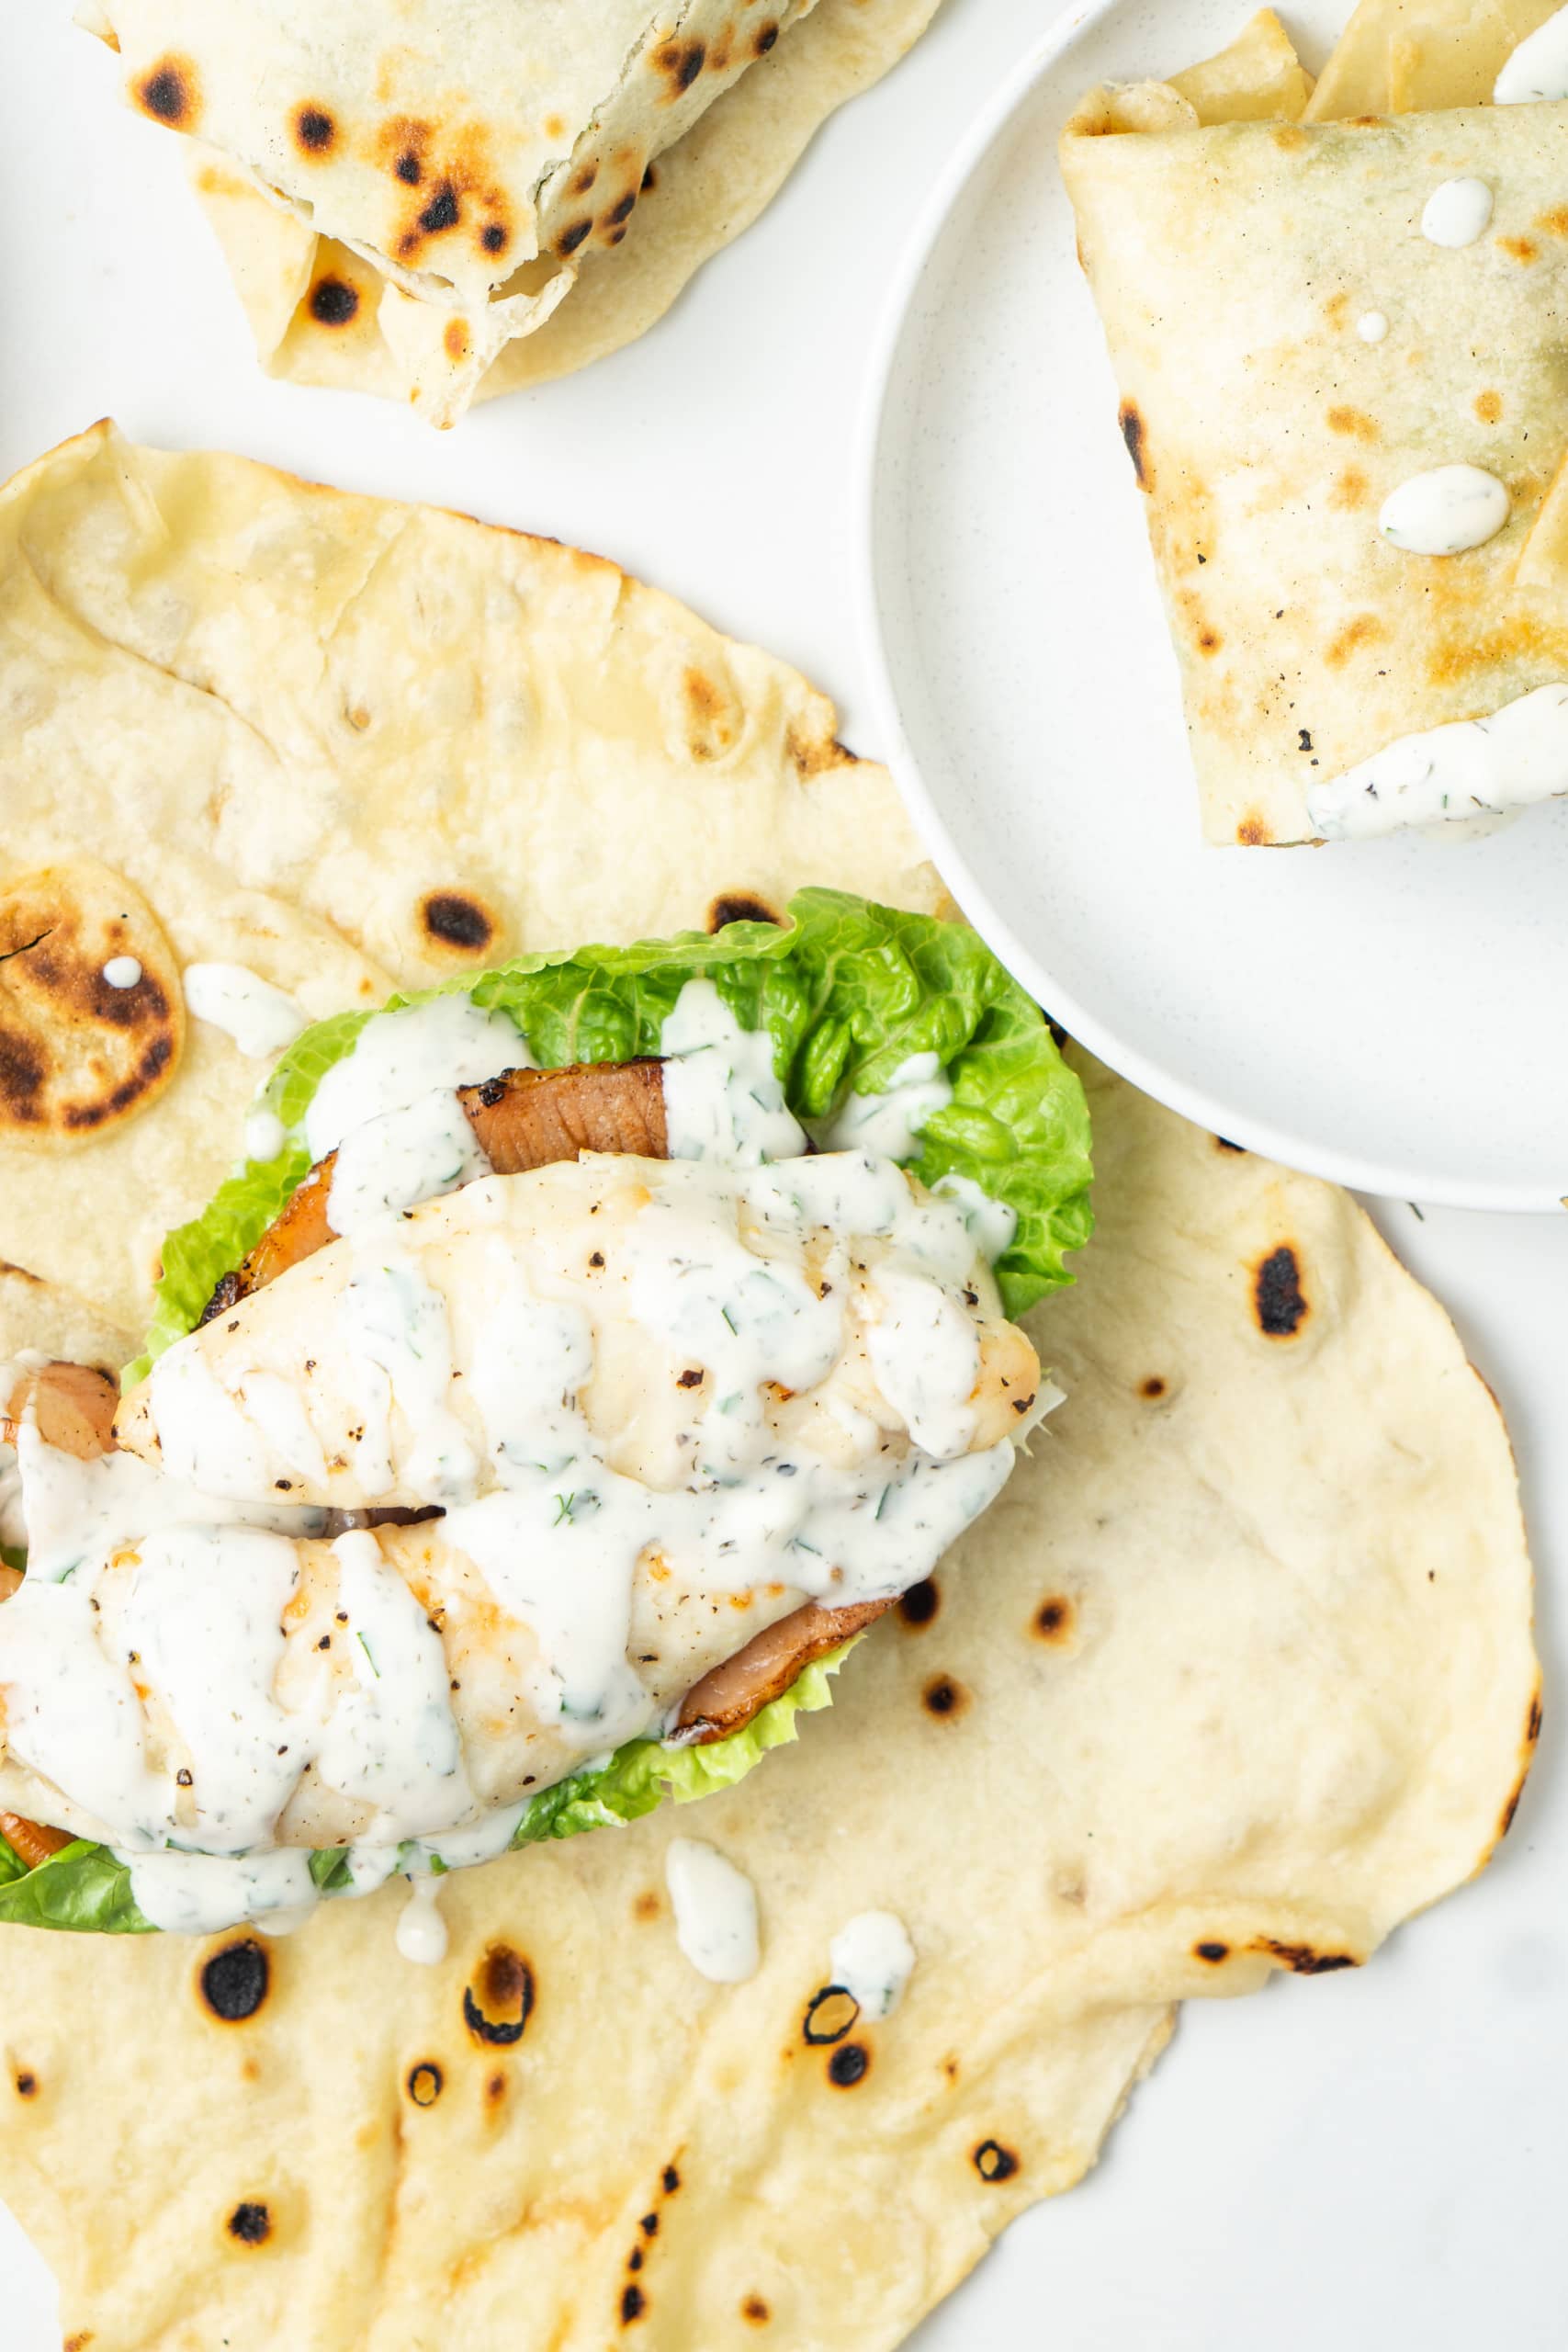 Chicken on a wrap with ranch dressing.